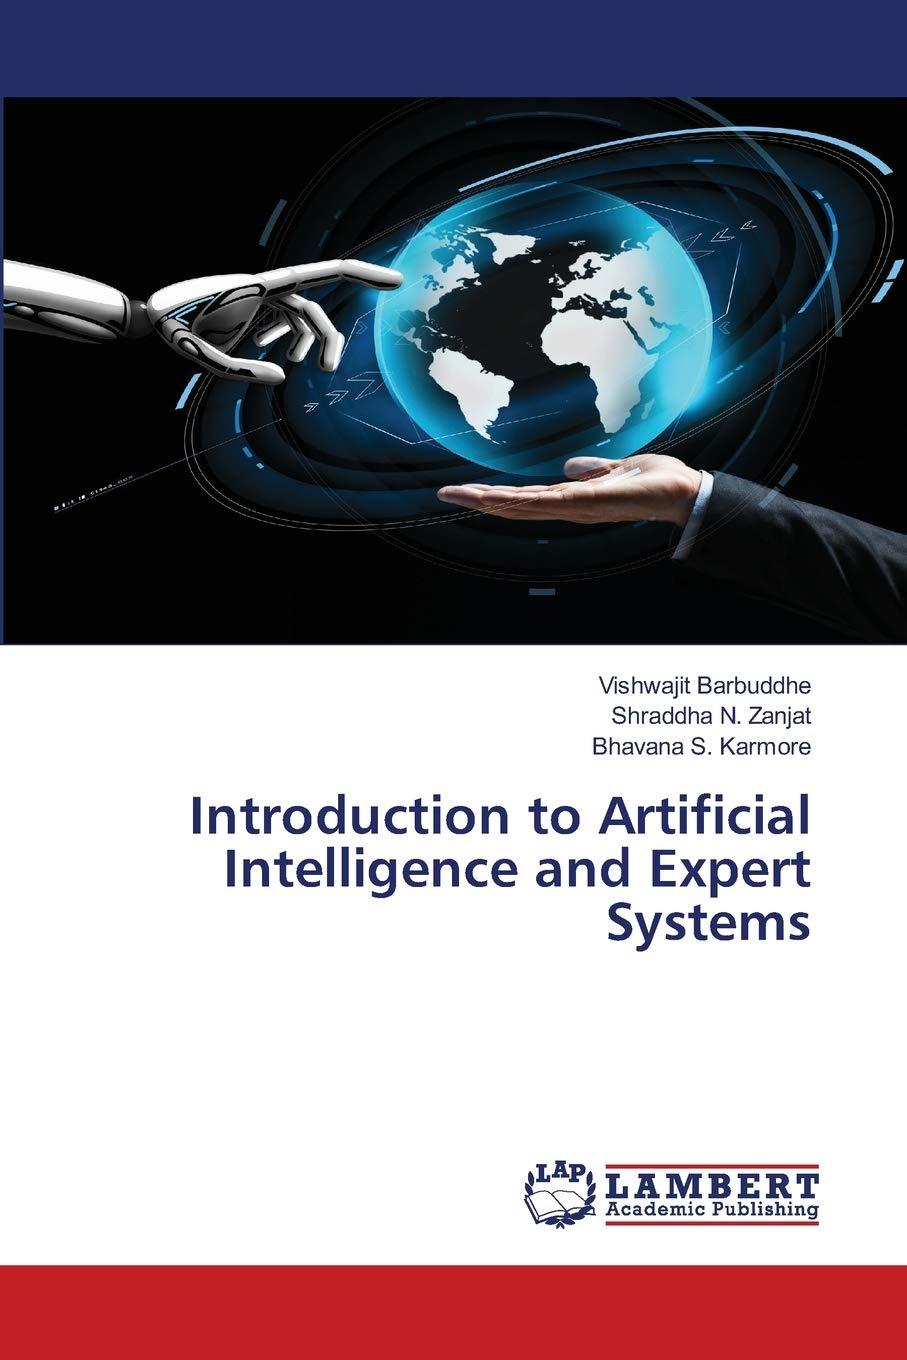 introduction to artificial intelligence and expert systems 1st edition vishwajit barbuddhe , shraddha n.